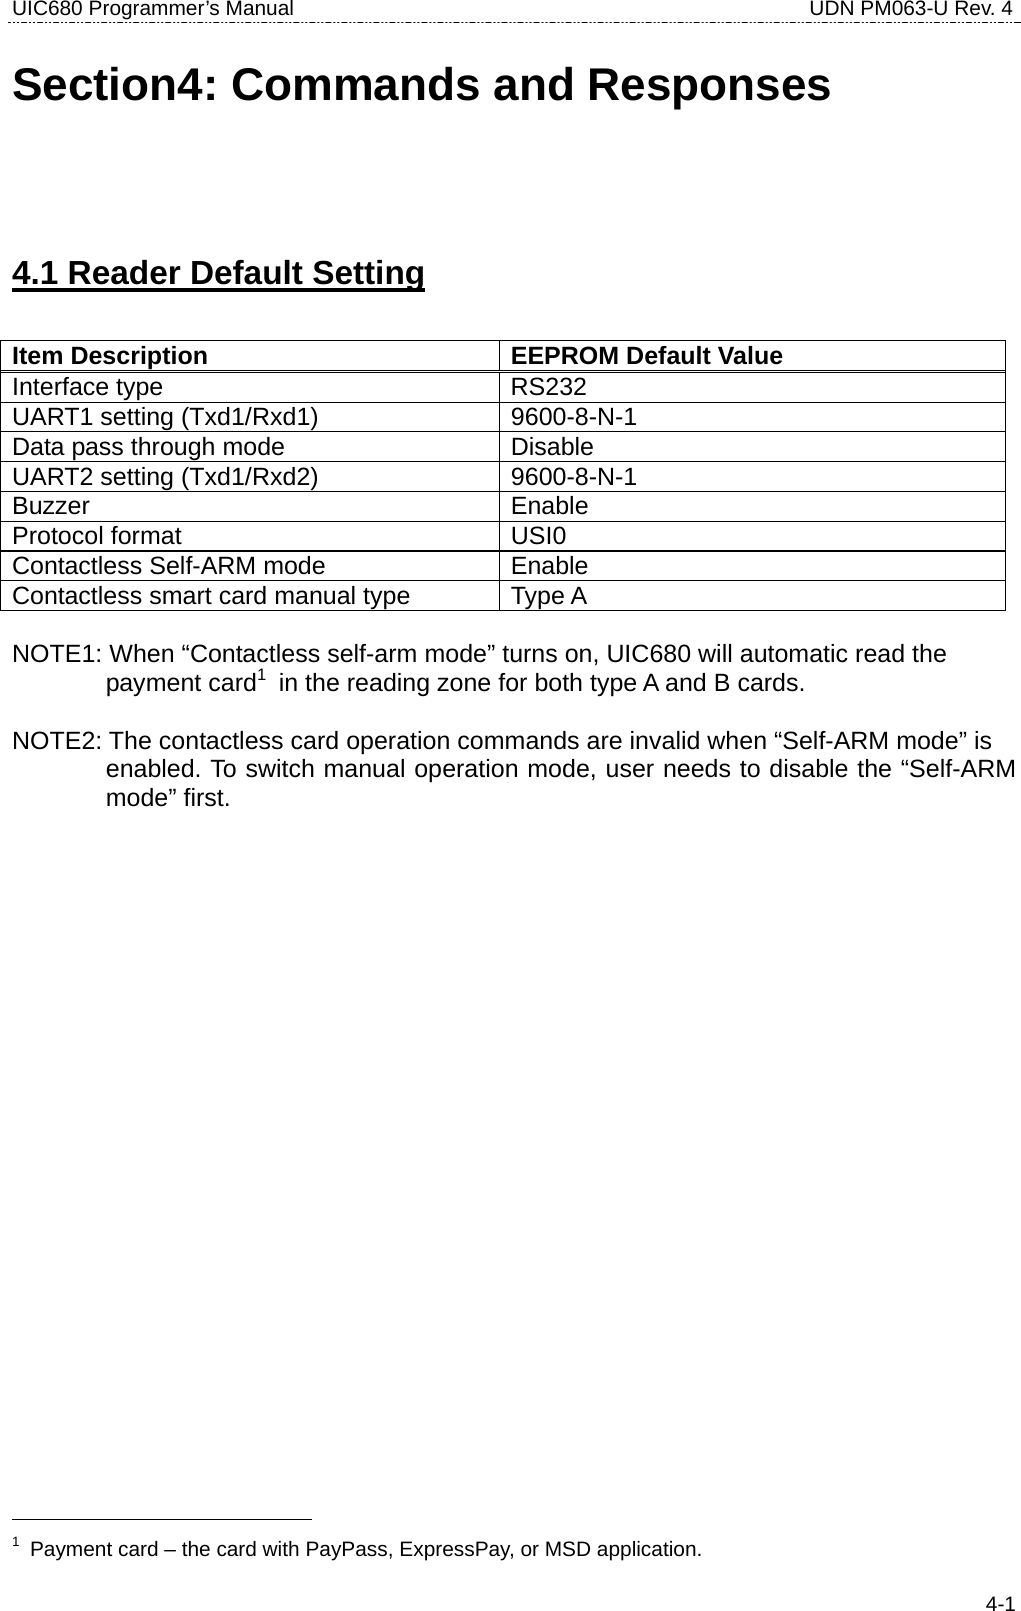 UIC680 Programmer’s Manual                                     UDN PM063-U Rev. 4  4-1Section4: Commands and Responses 4.1 Reader Default Setting  Item Description  EEPROM Default Value Interface type  RS232 UART1 setting (Txd1/Rxd1)  9600-8-N-1 Data pass through mode  Disable UART2 setting (Txd1/Rxd2)  9600-8-N-1 Buzzer Enable Protocol format  USI0 Contactless Self-ARM mode  Enable Contactless smart card manual type  Type A  NOTE1: When “Contactless self-arm mode” turns on, UIC680 will automatic read the   payment card1  in the reading zone for both type A and B cards.  NOTE2: The contactless card operation commands are invalid when “Self-ARM mode” is   enabled. To switch manual operation mode, user needs to disable the “Self-ARM mode” first.                                               1  Payment card – the card with PayPass, ExpressPay, or MSD application. 